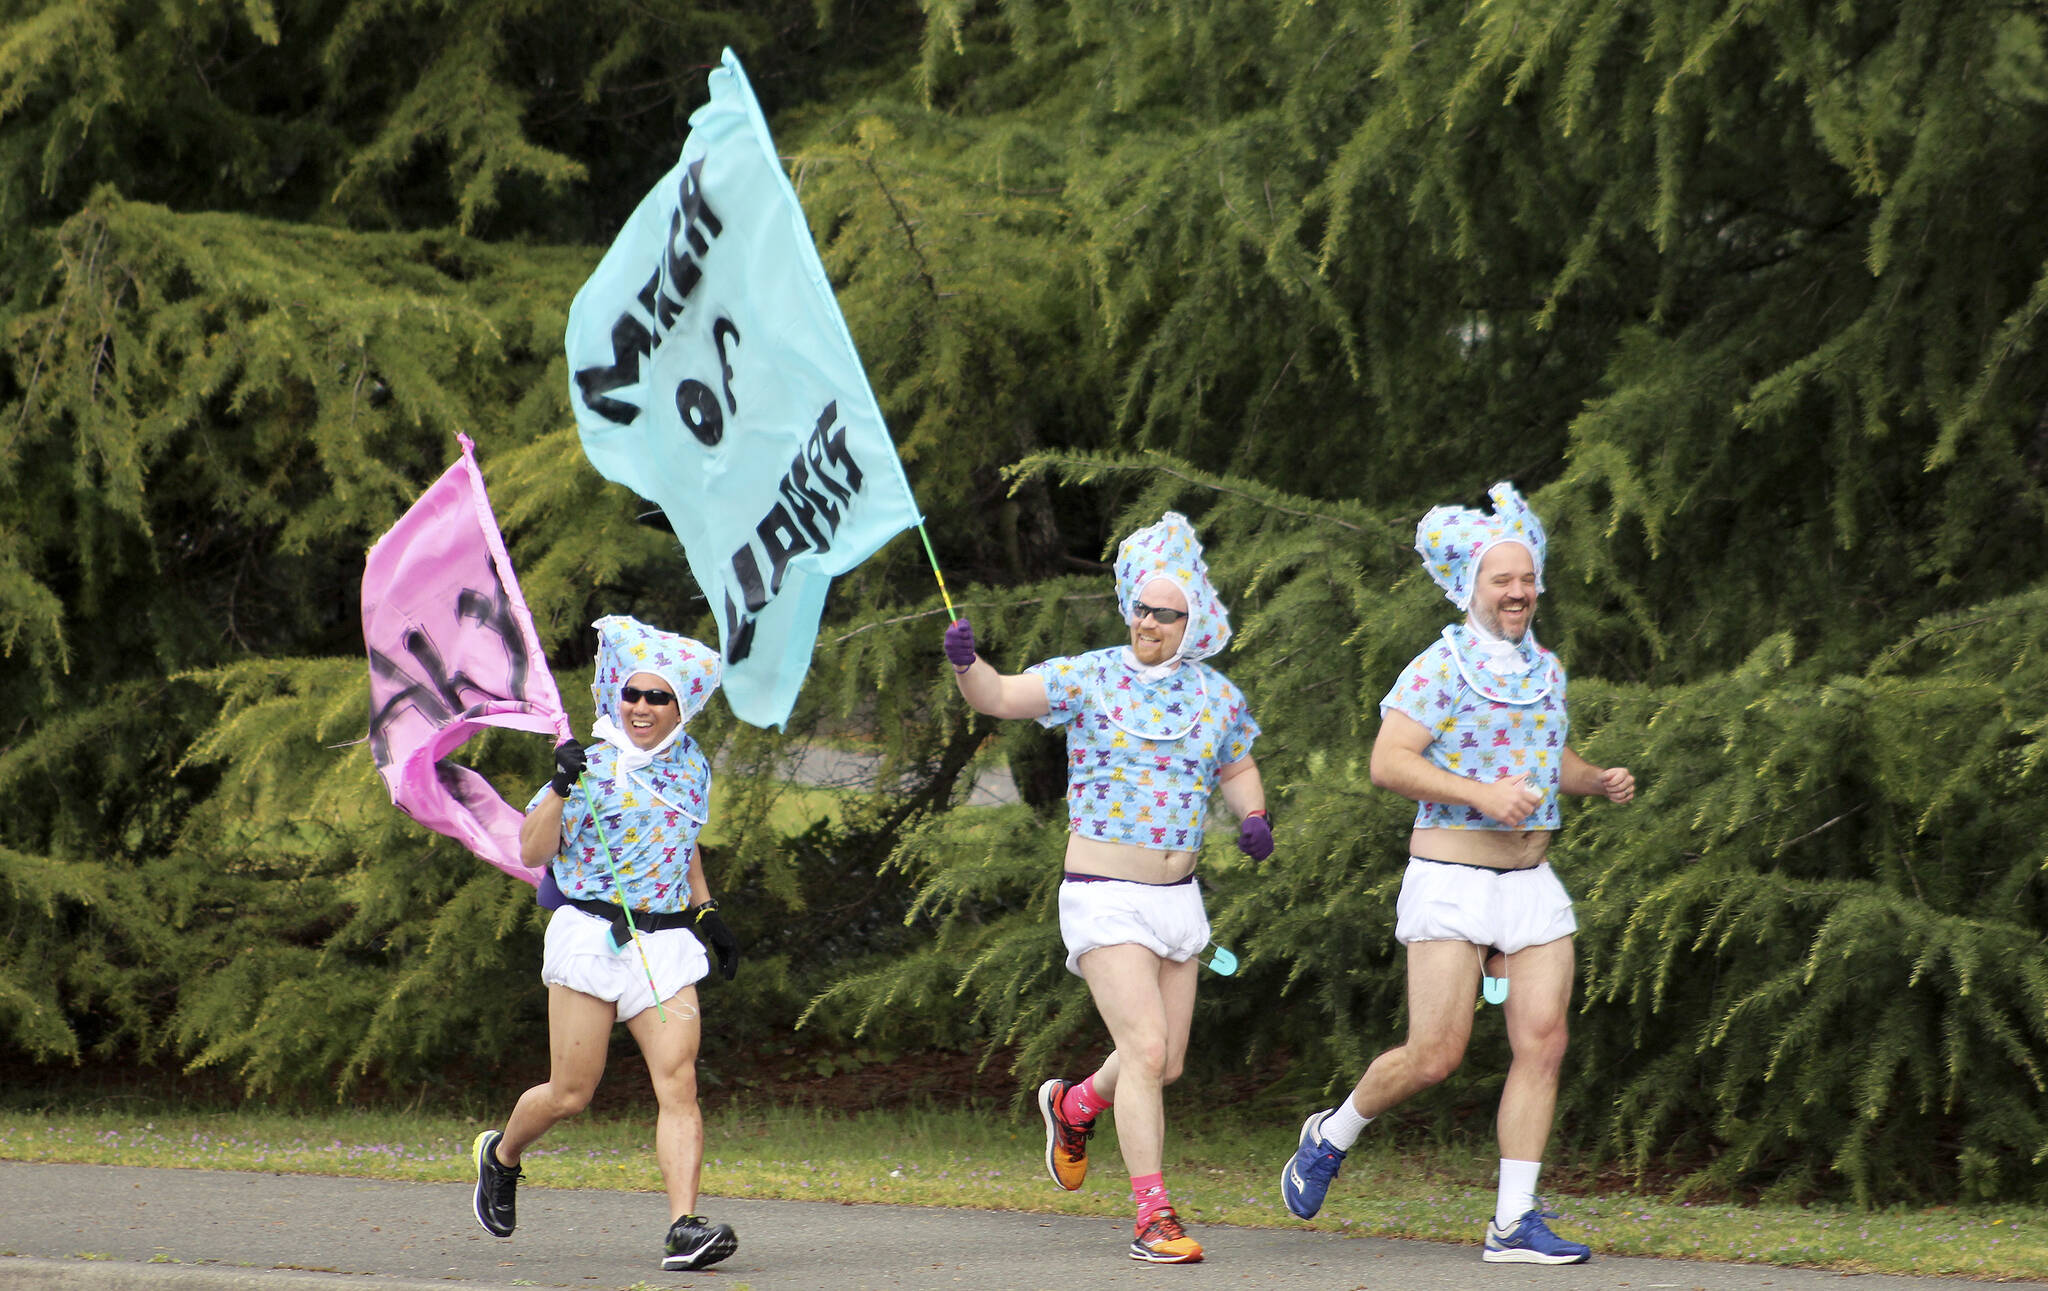 The 2019 March of Diapers fundraiser event collected 153,362 diapers, celebrating with a diaper run along SW 320th Street in Federal Way. Olivia Sullivan/staff photo